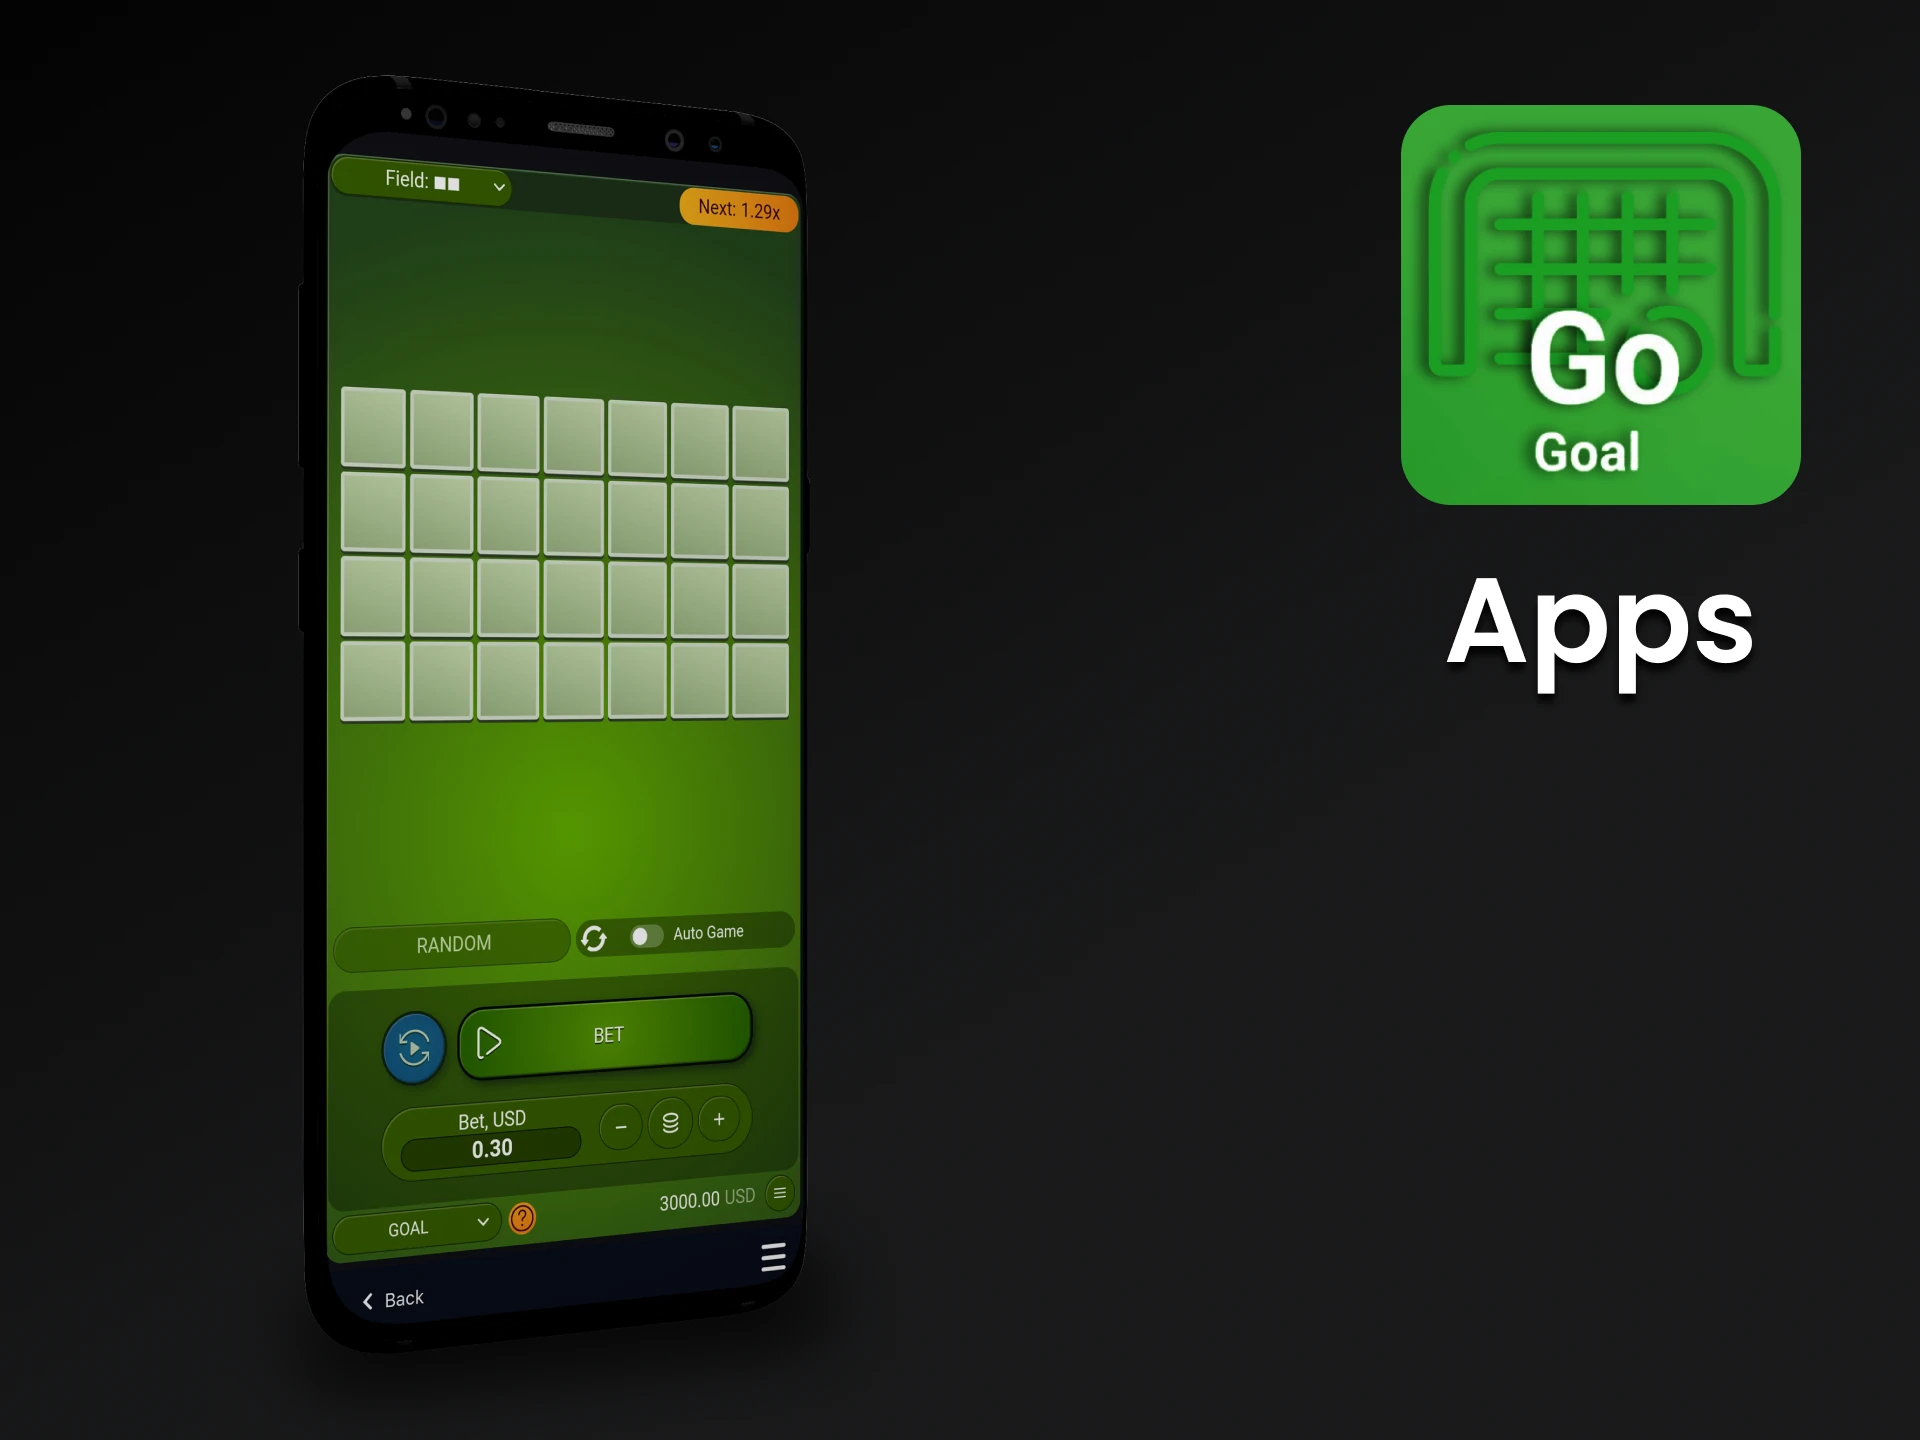 Play the game Goal via your smartphone.